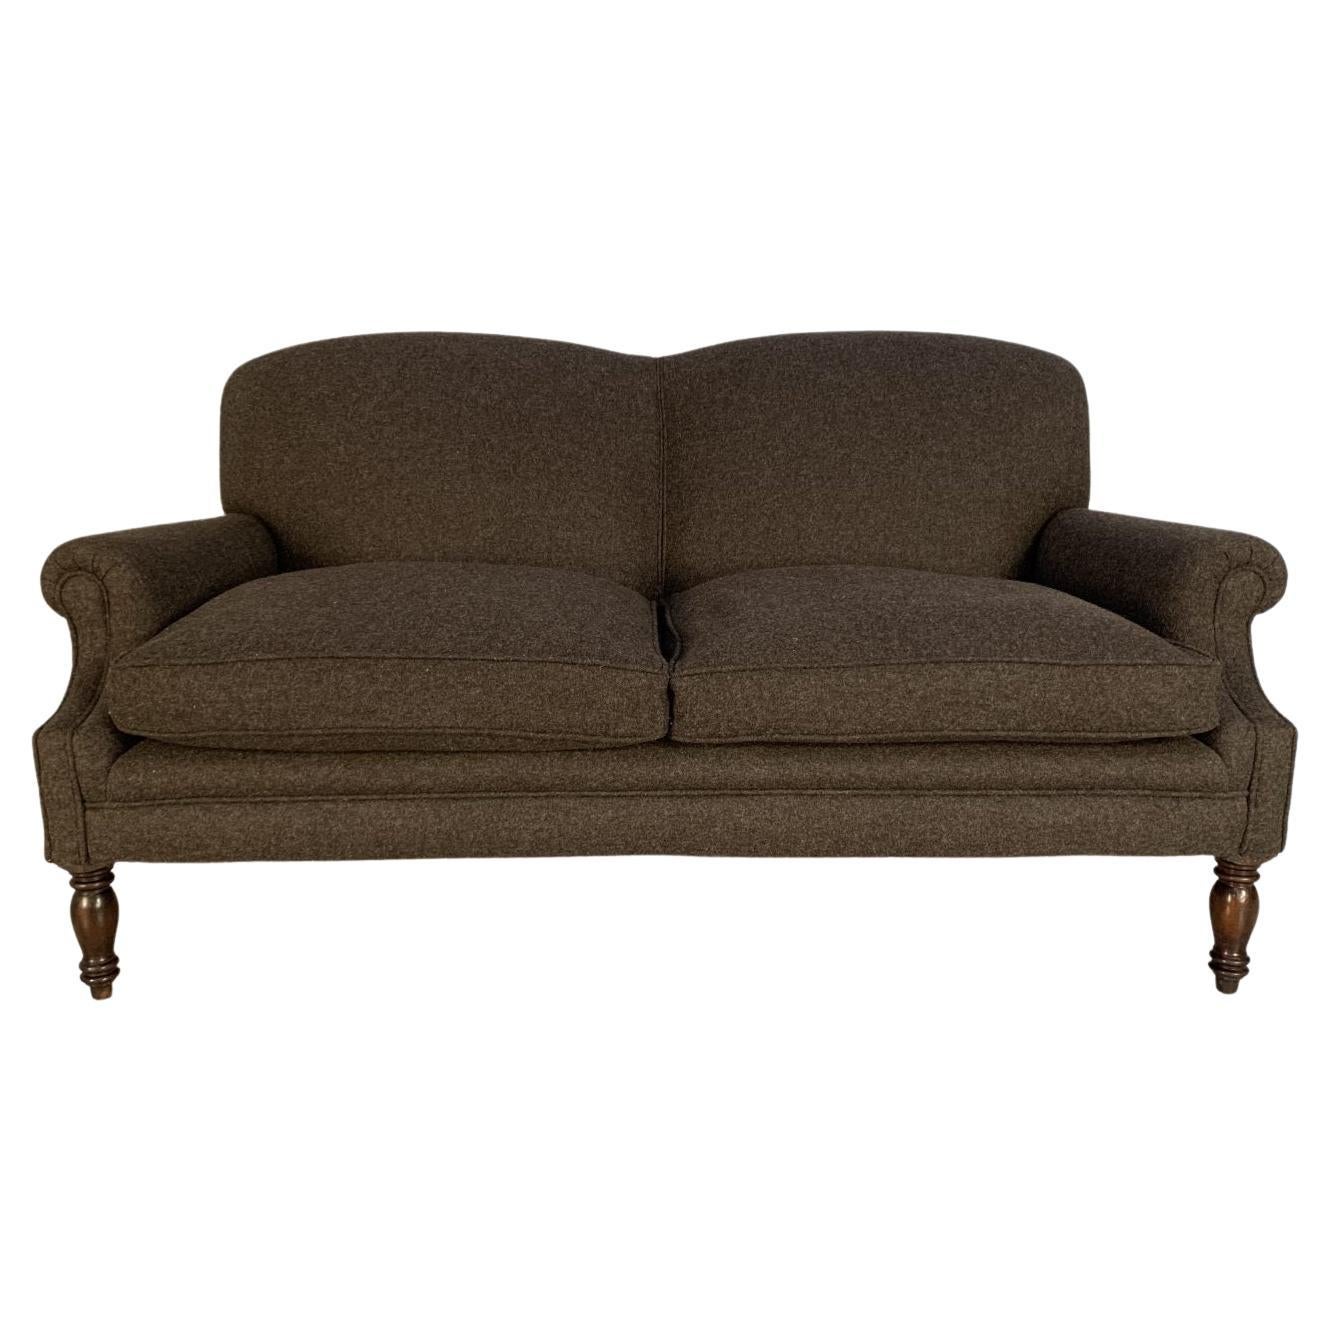 George Smith Dahl Sofa - In Abraham Moon Wolle